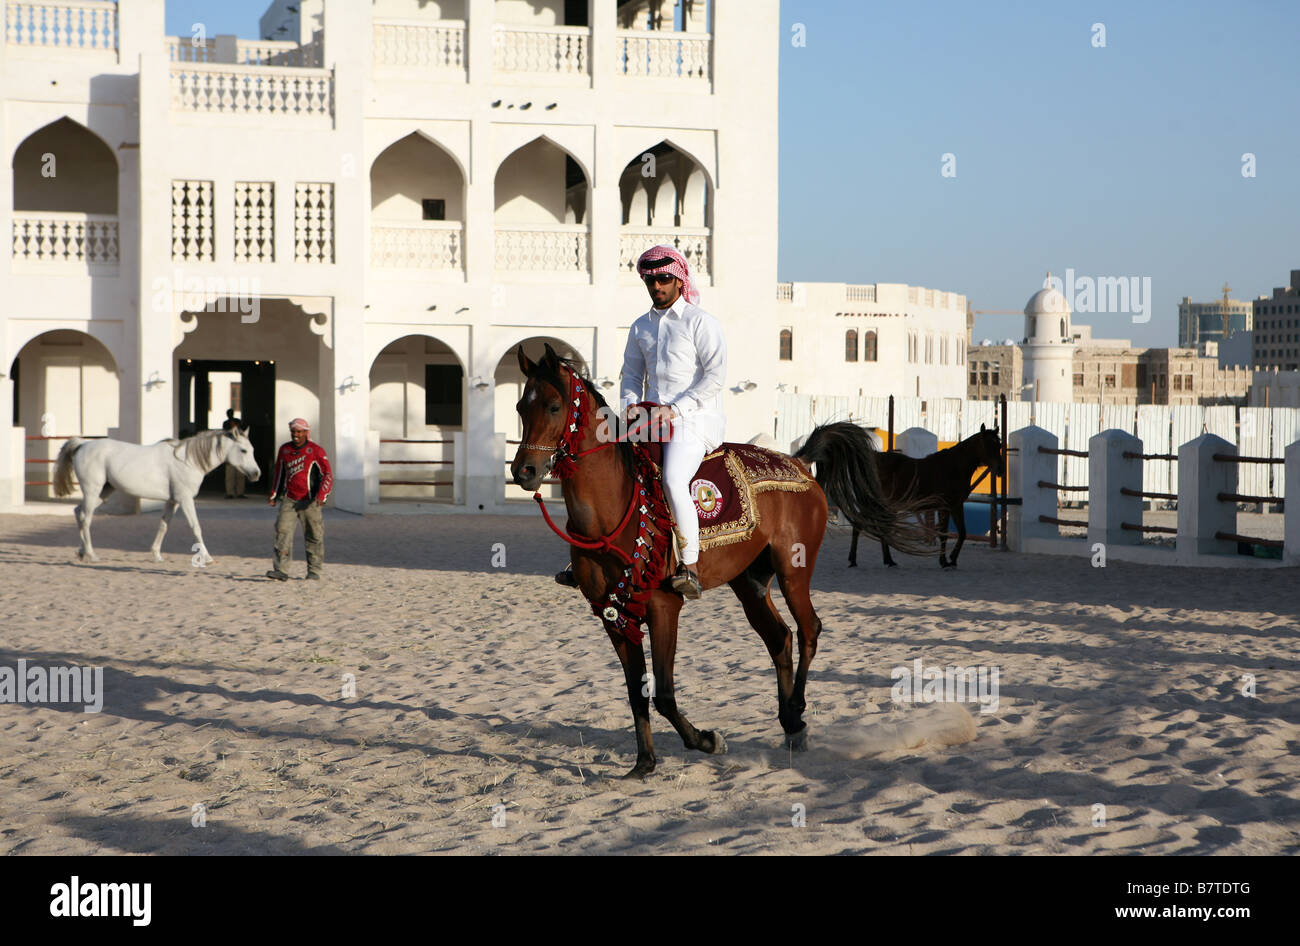 A rider shows off a pure bred Arab stallion its saddle adorned with the State of Qatar arms. Stock Photo